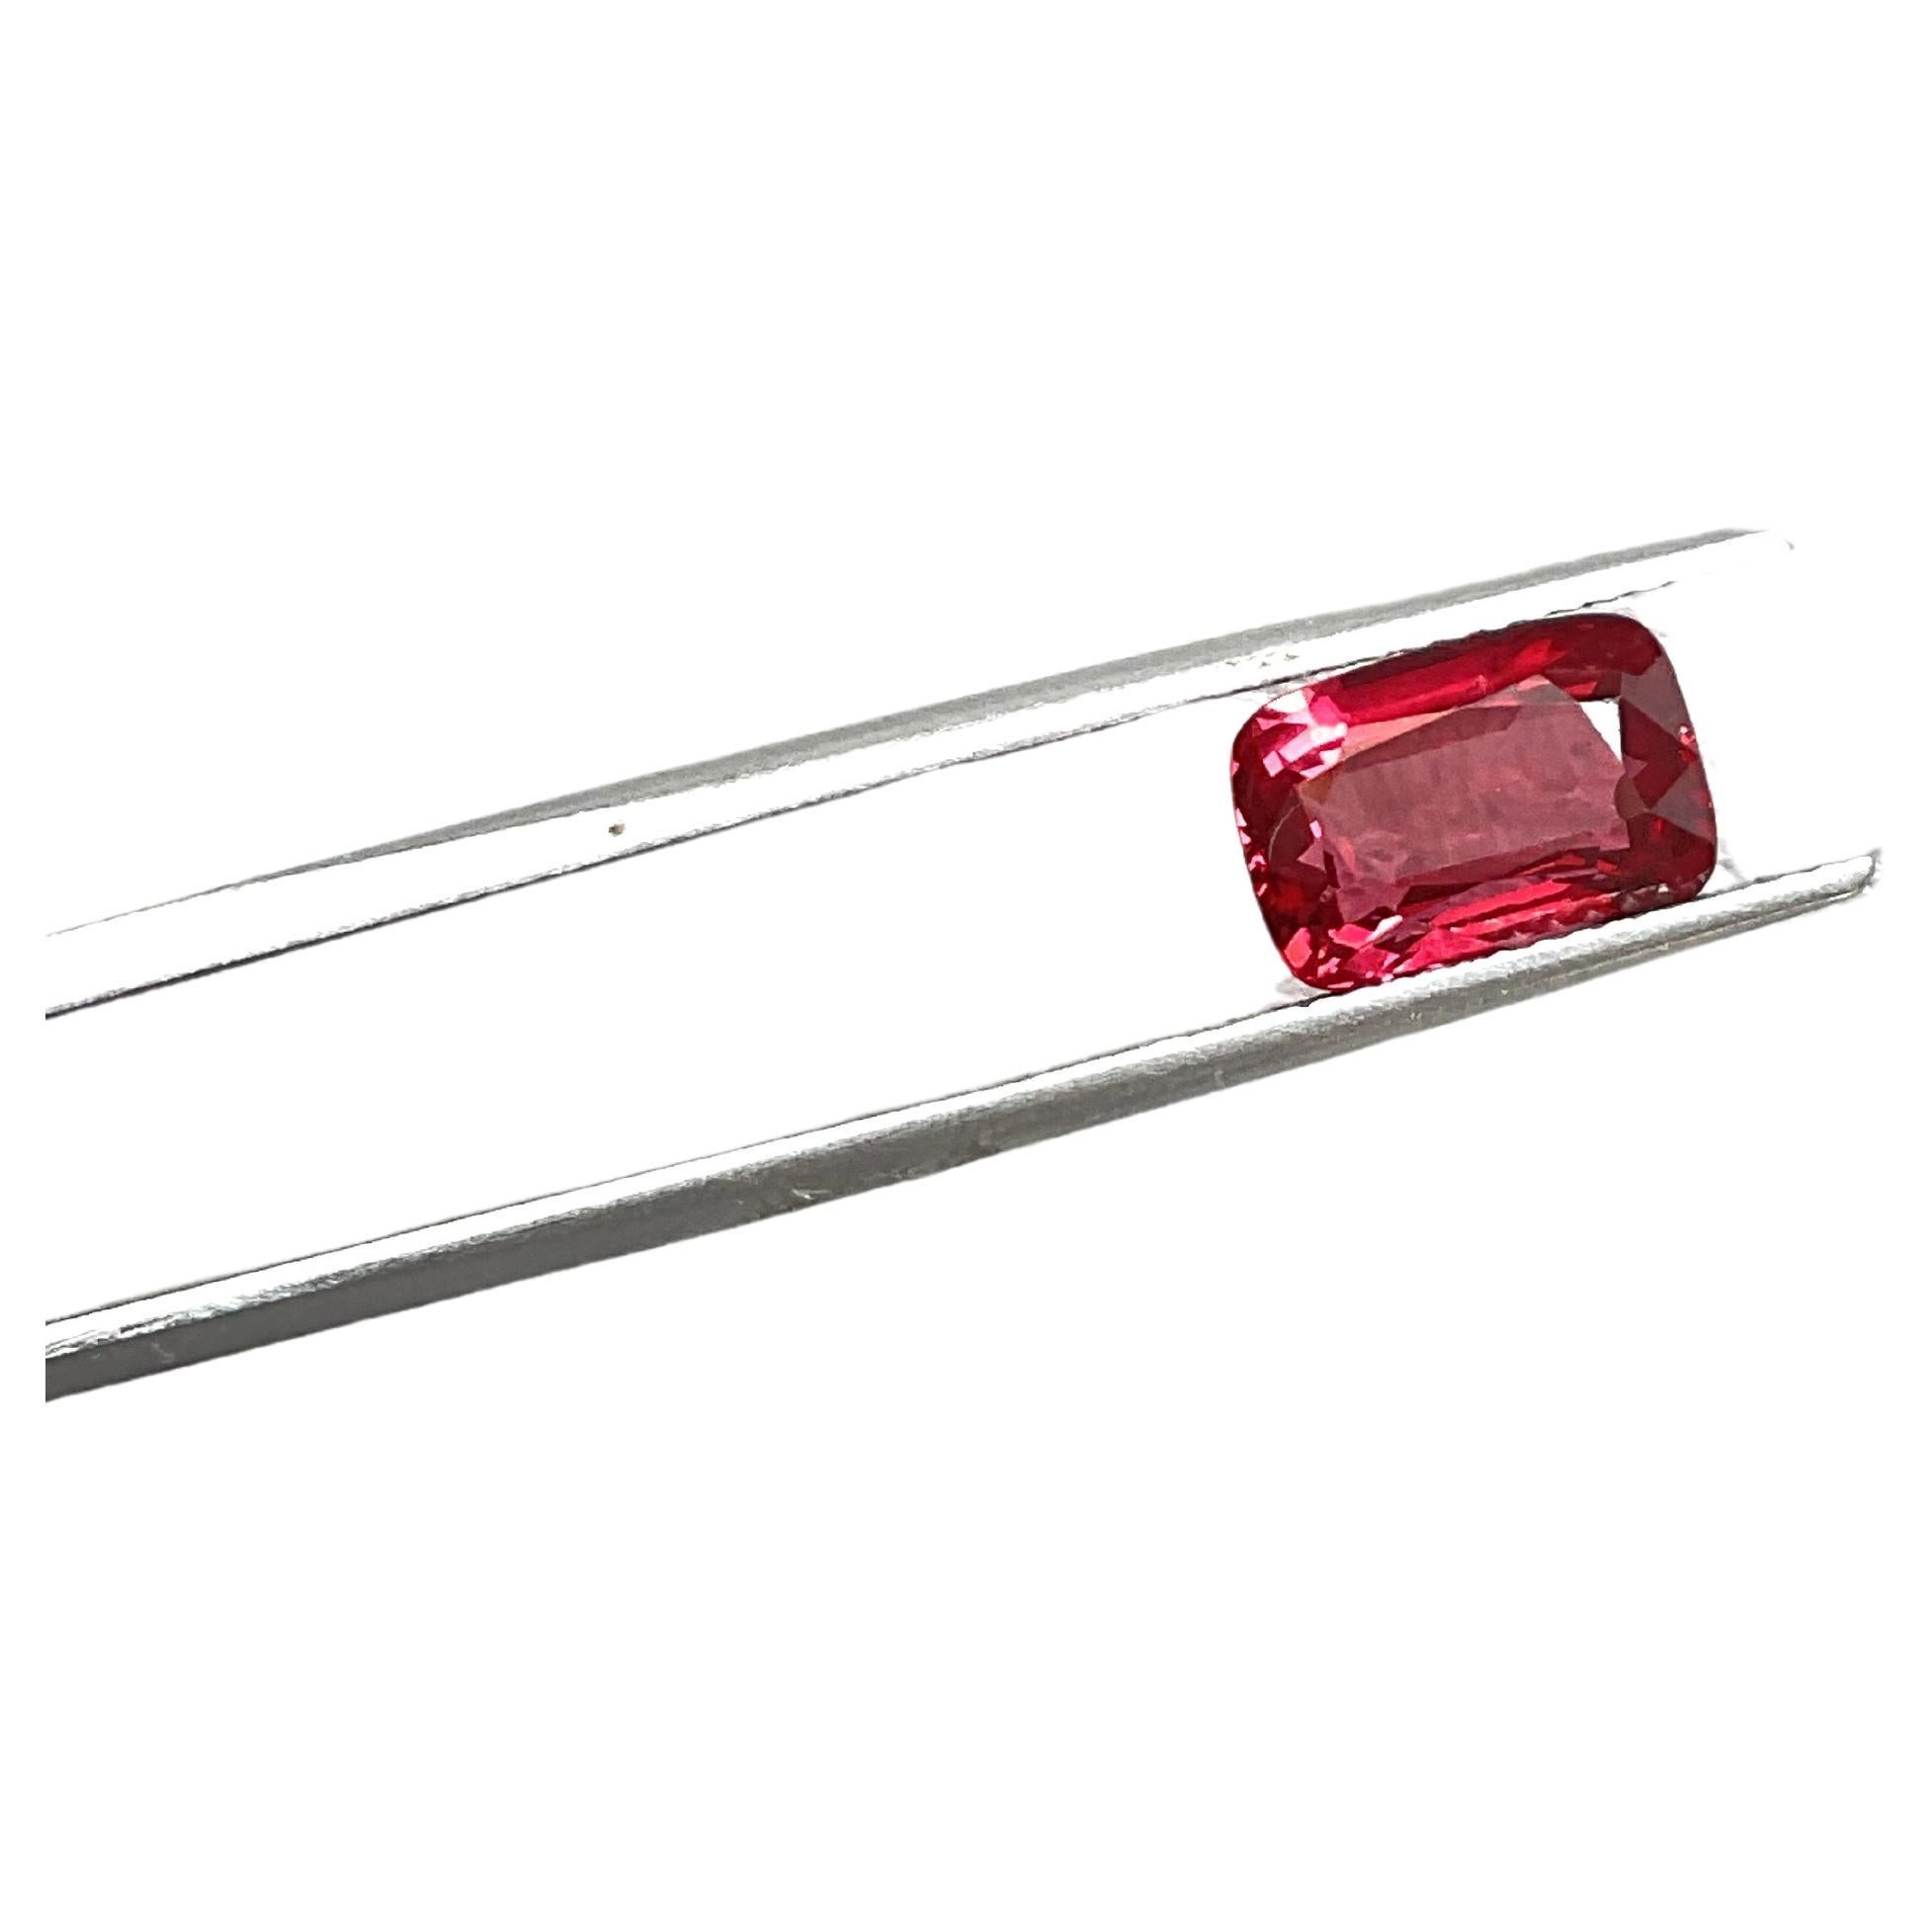 Burmese no heat red spinel cushion
Rare color and quality
Can be easily set into a beautiful ring !
Clarity VS
Weight: 3.28 Carats
Size: 9.99x6.94x5.01 MM
Pieces: 1
Shape: Faceted cushion cut stone